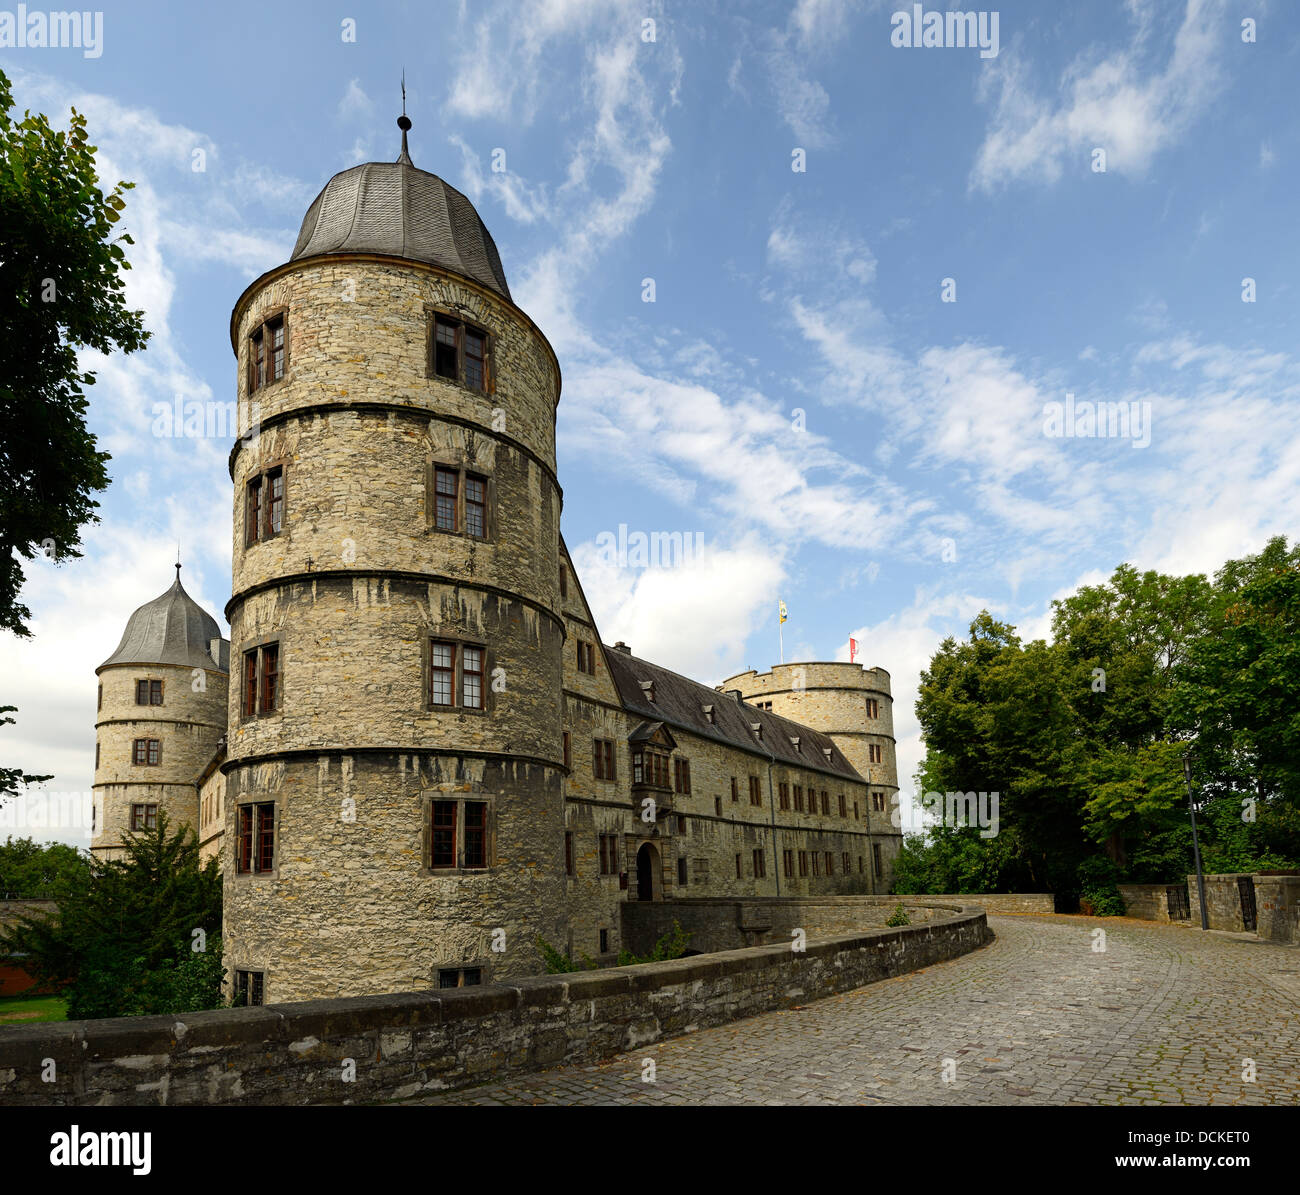 Wewelsburg Castle, now a museum outlining the atrocities of the SS, Wewelsburg, Germany, Europe Stock Photo